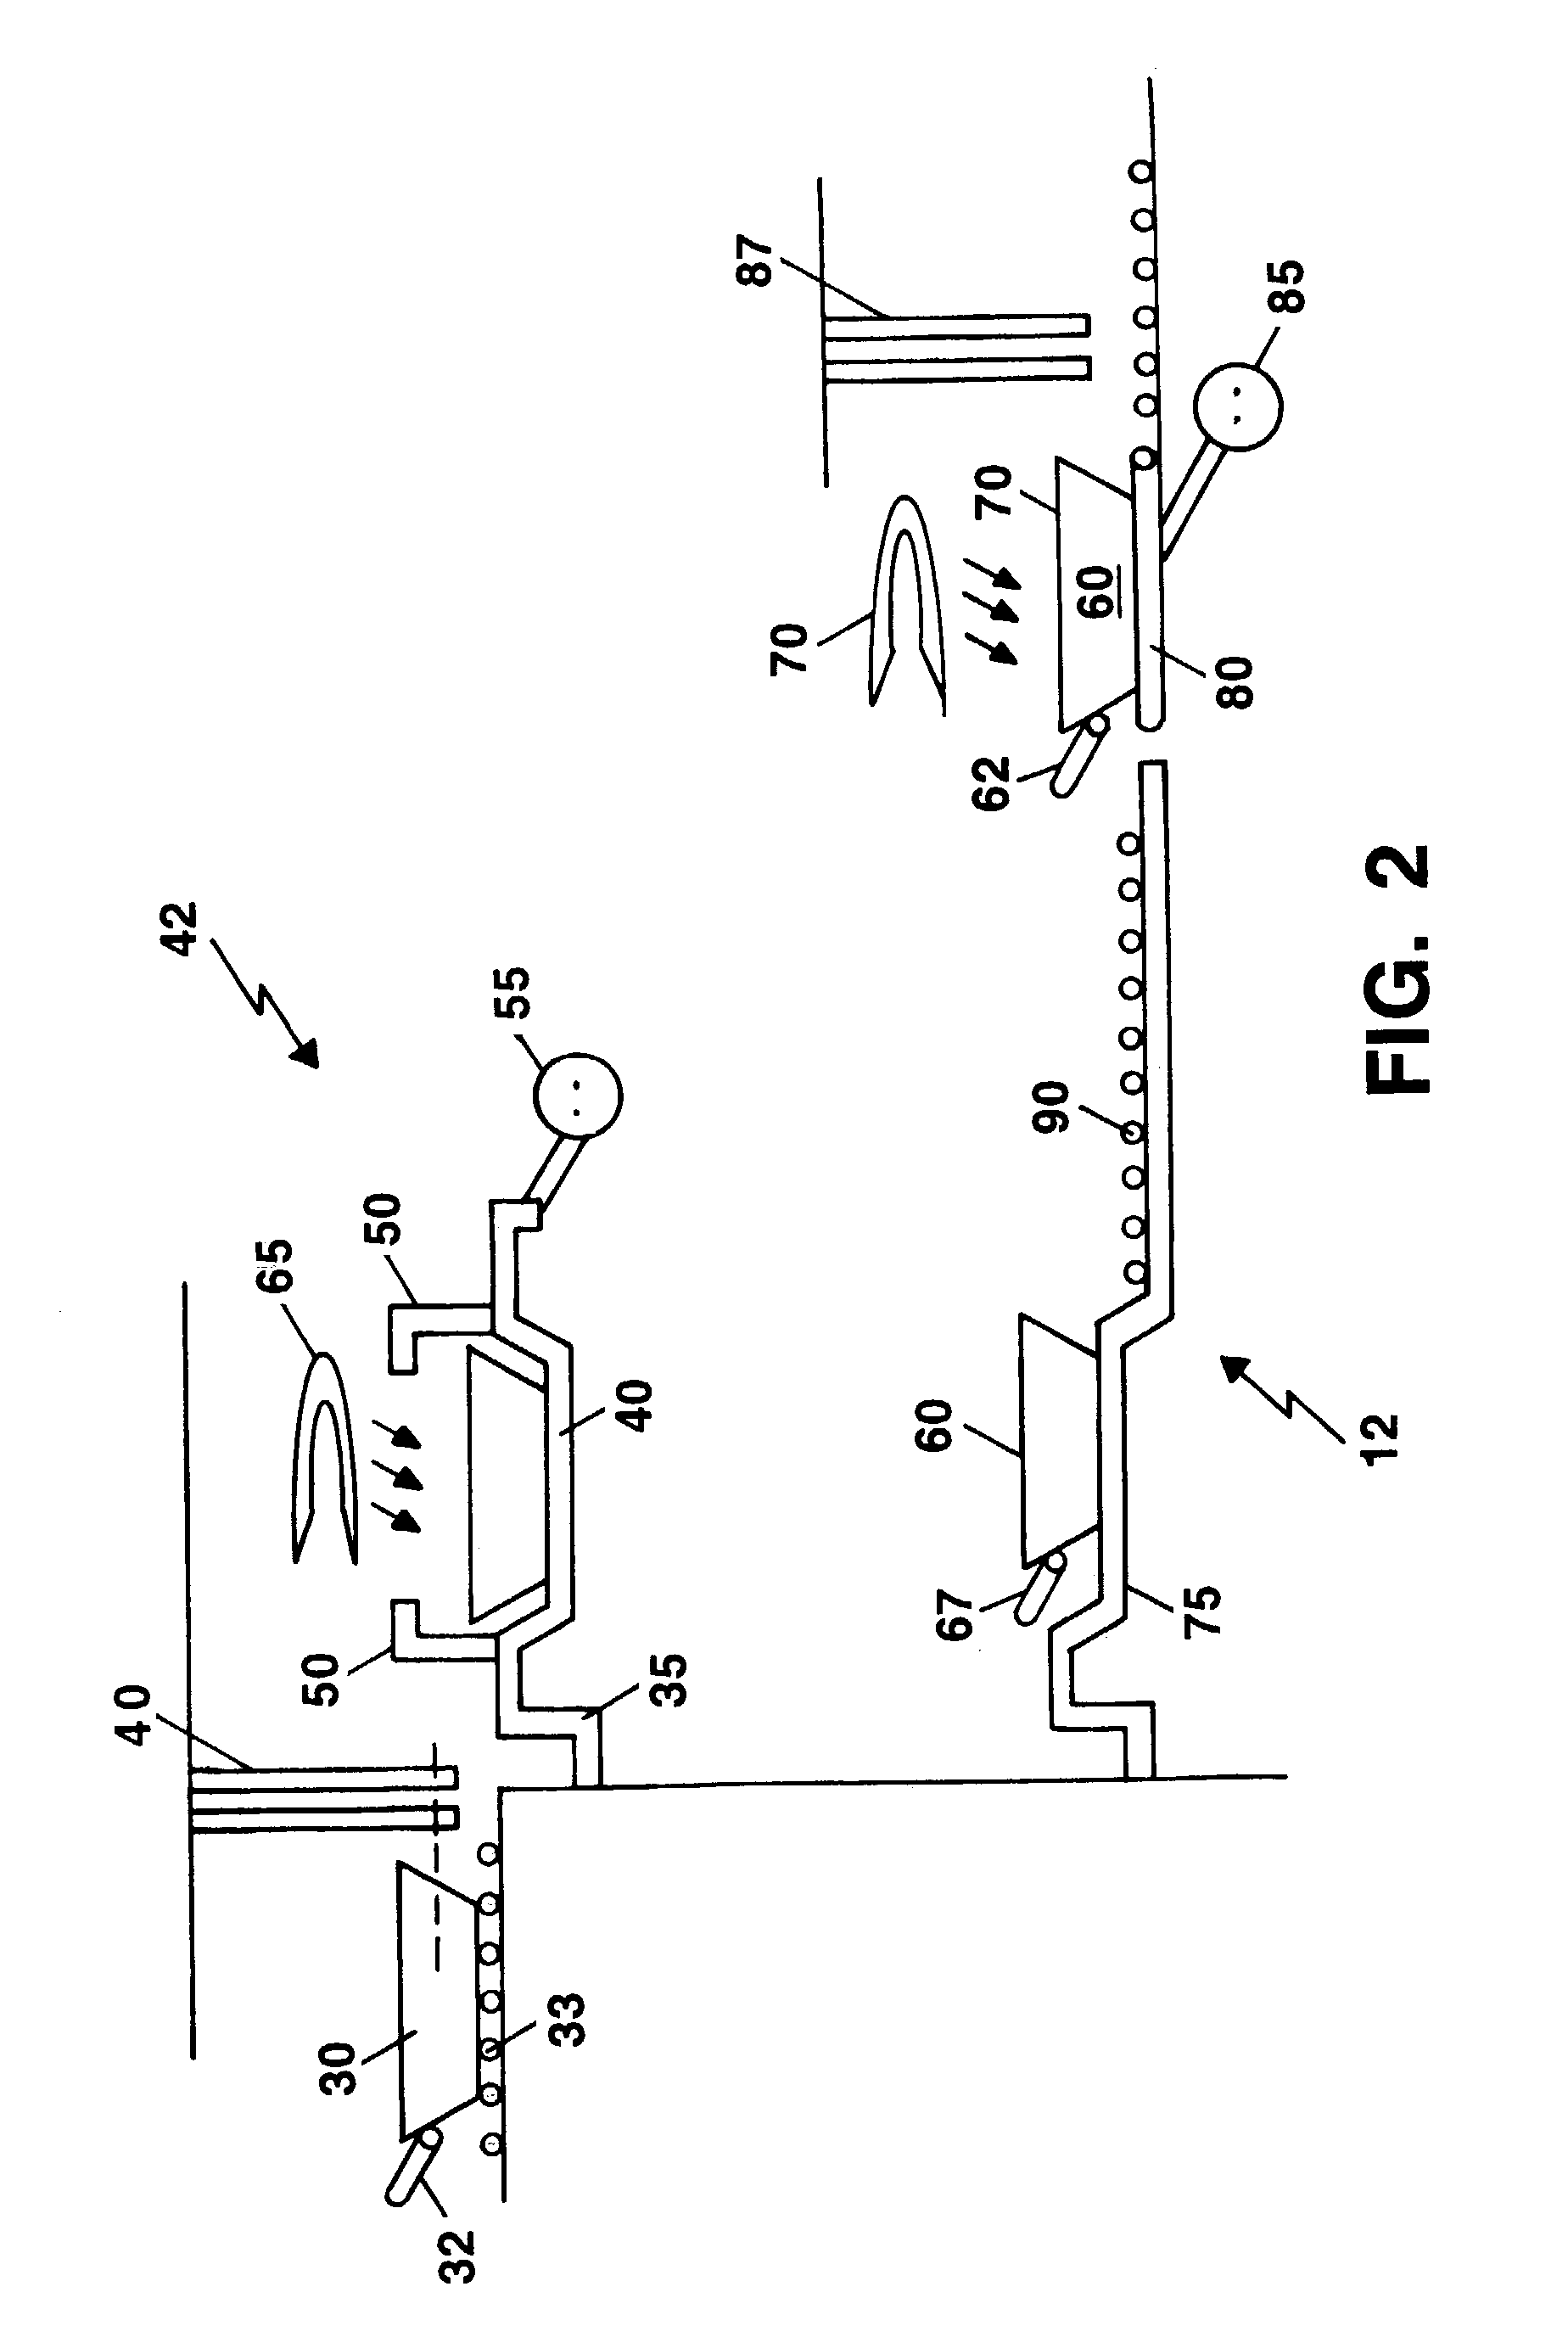 System and method of detecting, neutralizing, and containing suspected contaminated articles